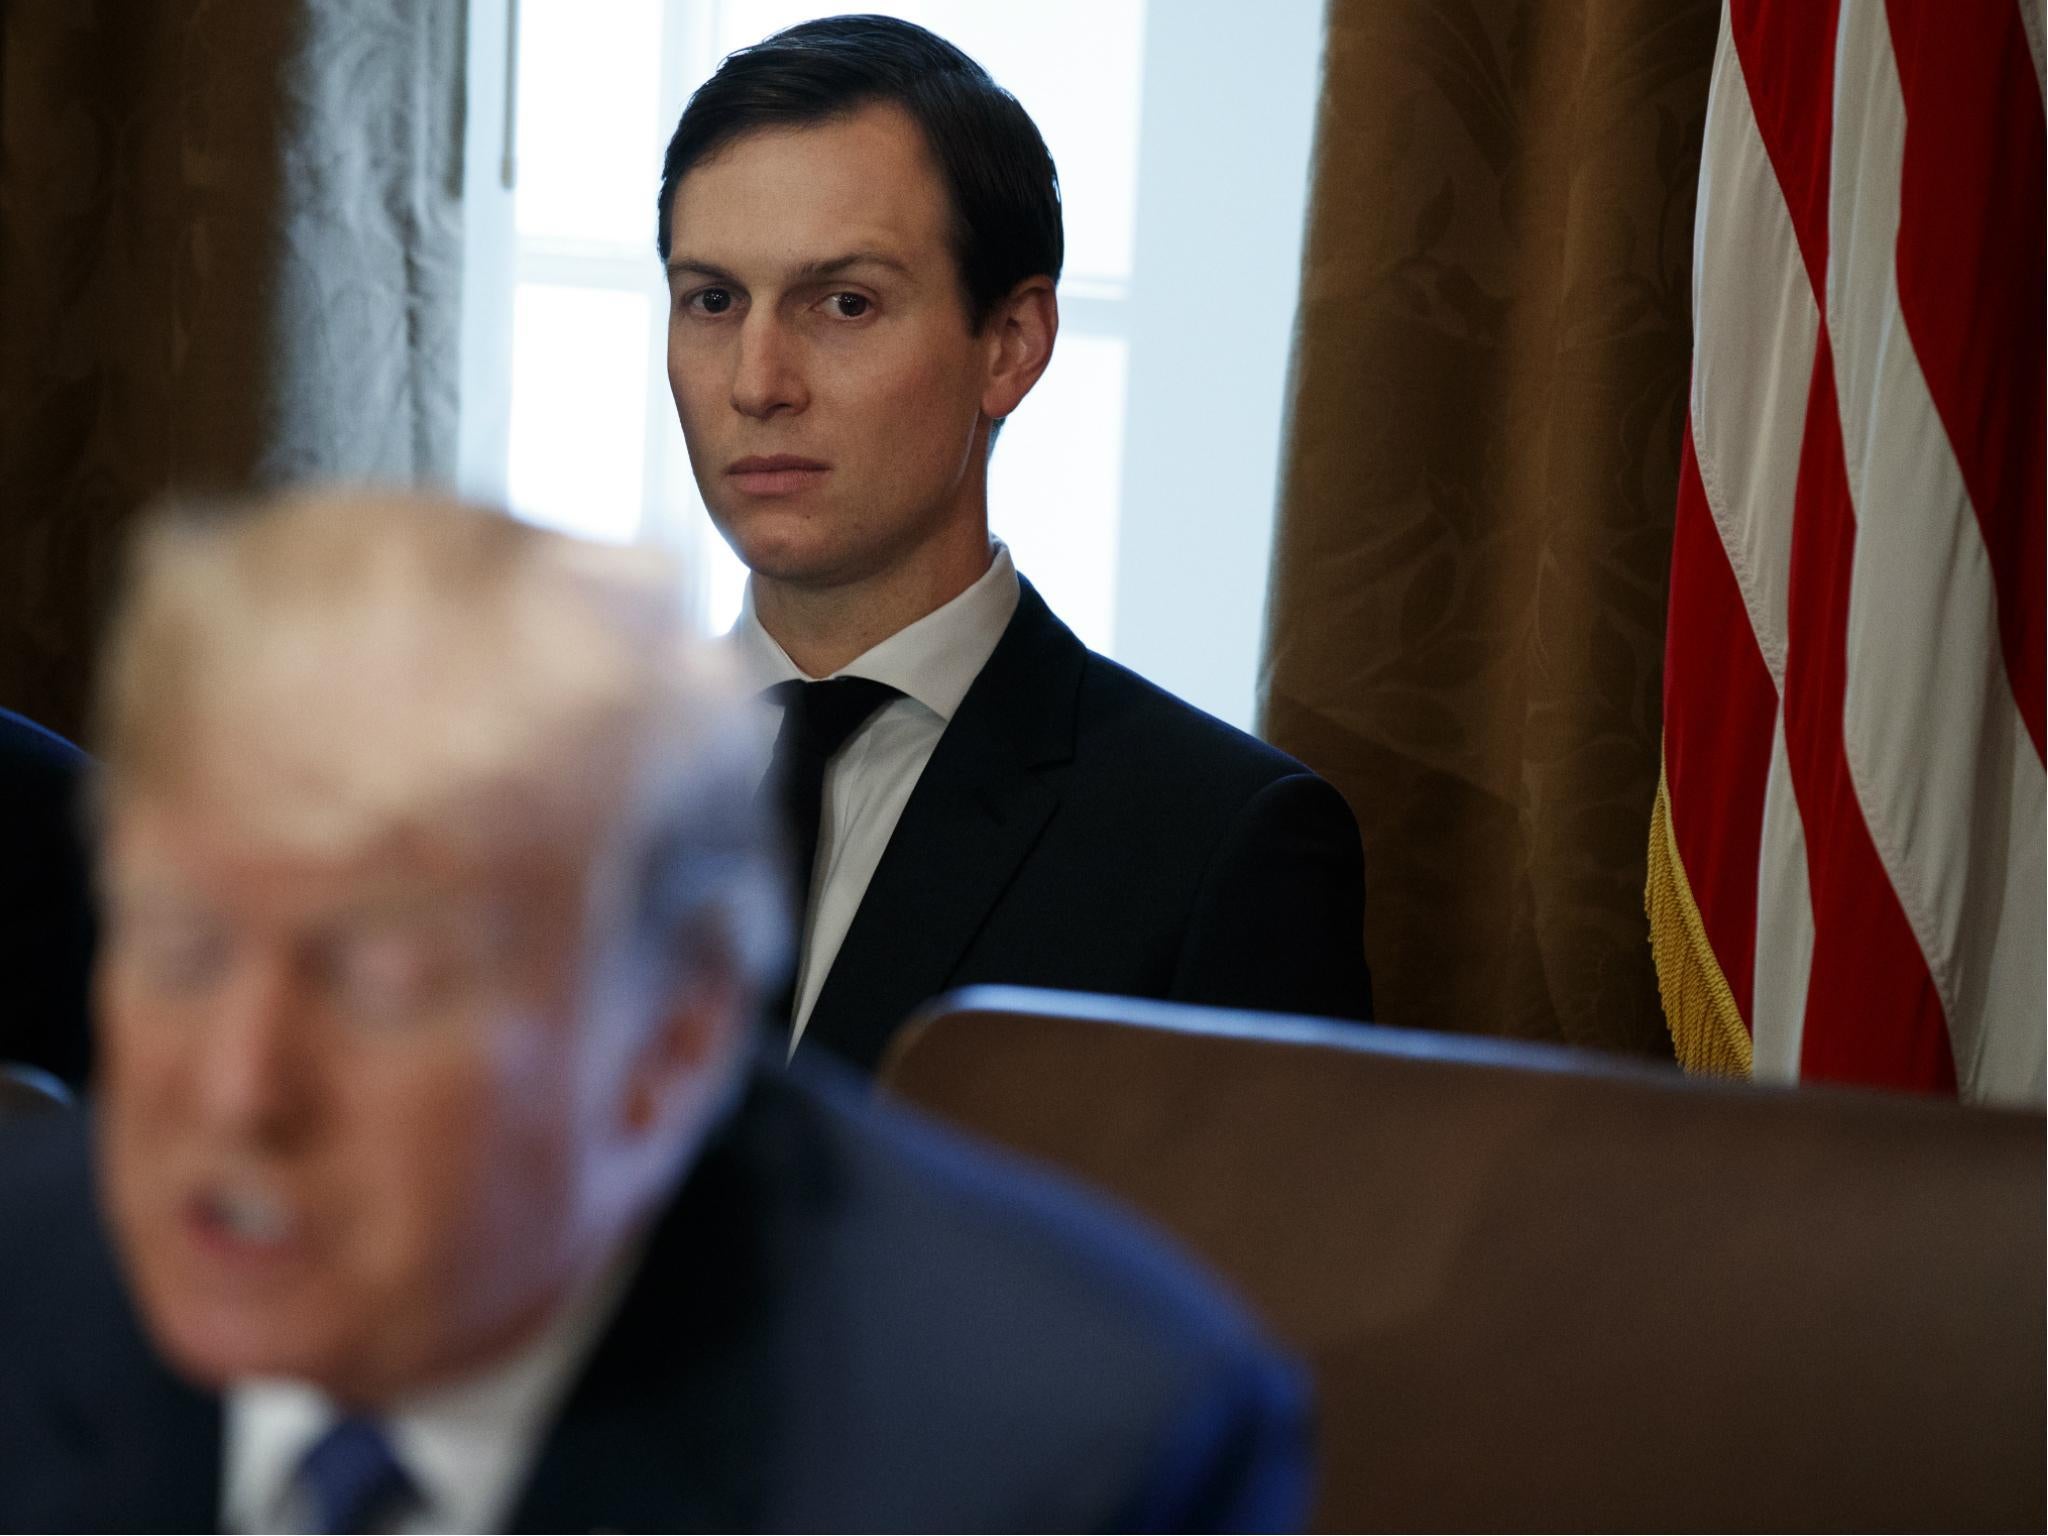 Jared Kushner promised 'better prospects' for the Palestinian people under Trump's presidency